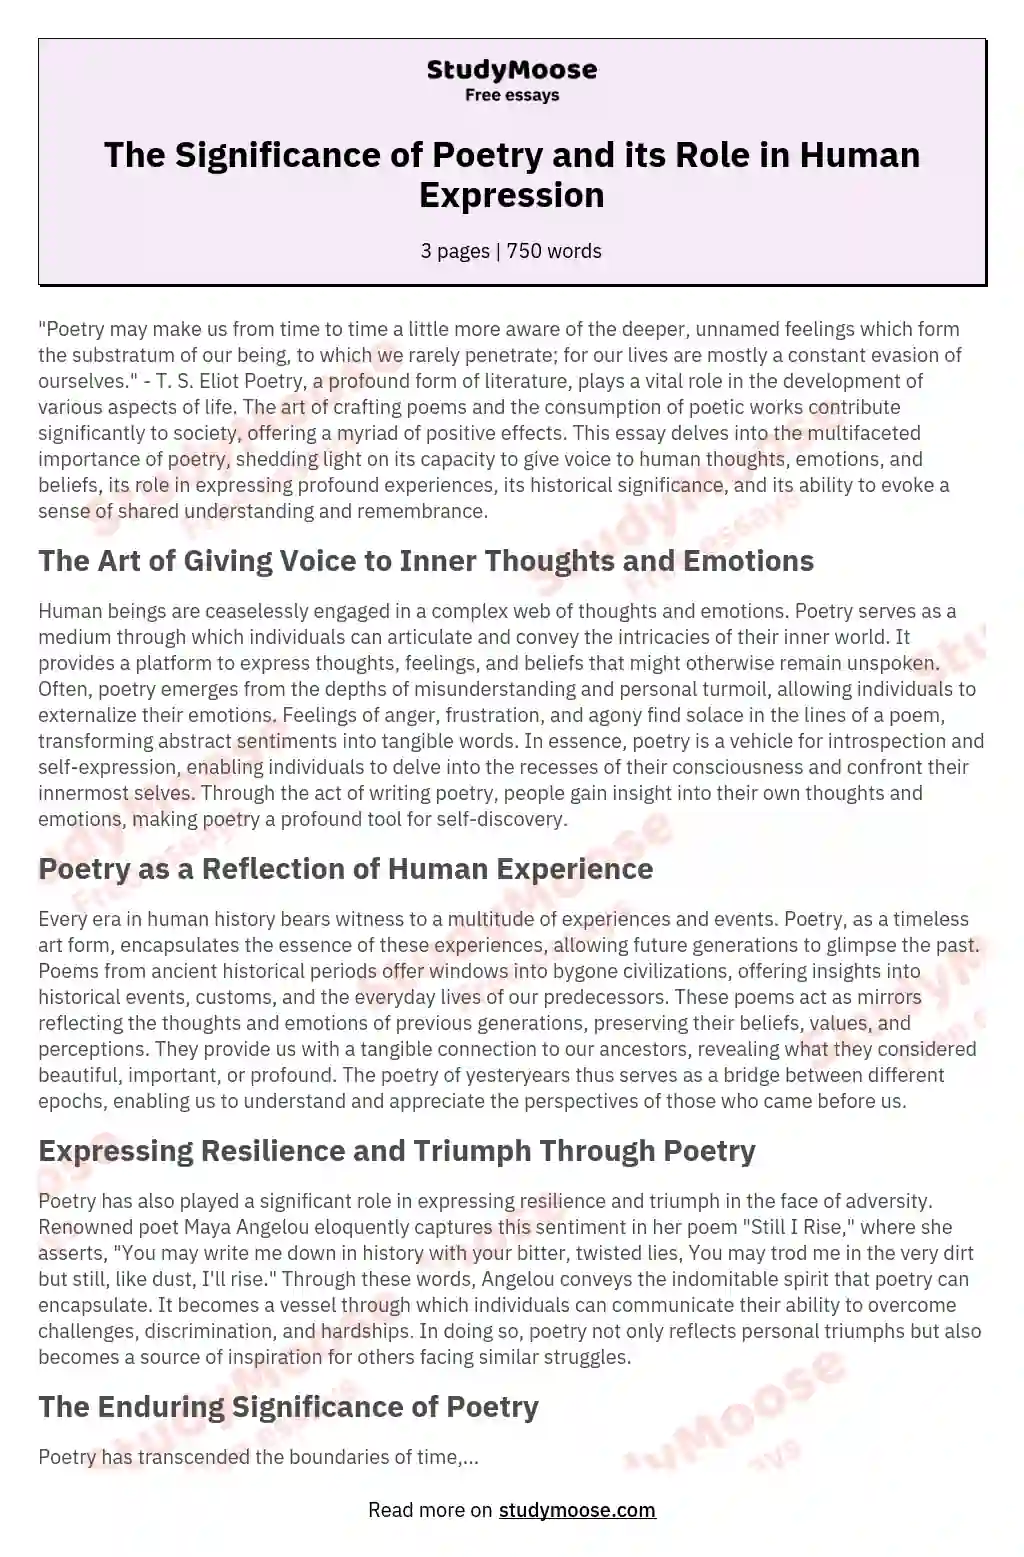 The Significance of Poetry and its Role in Human Expression essay